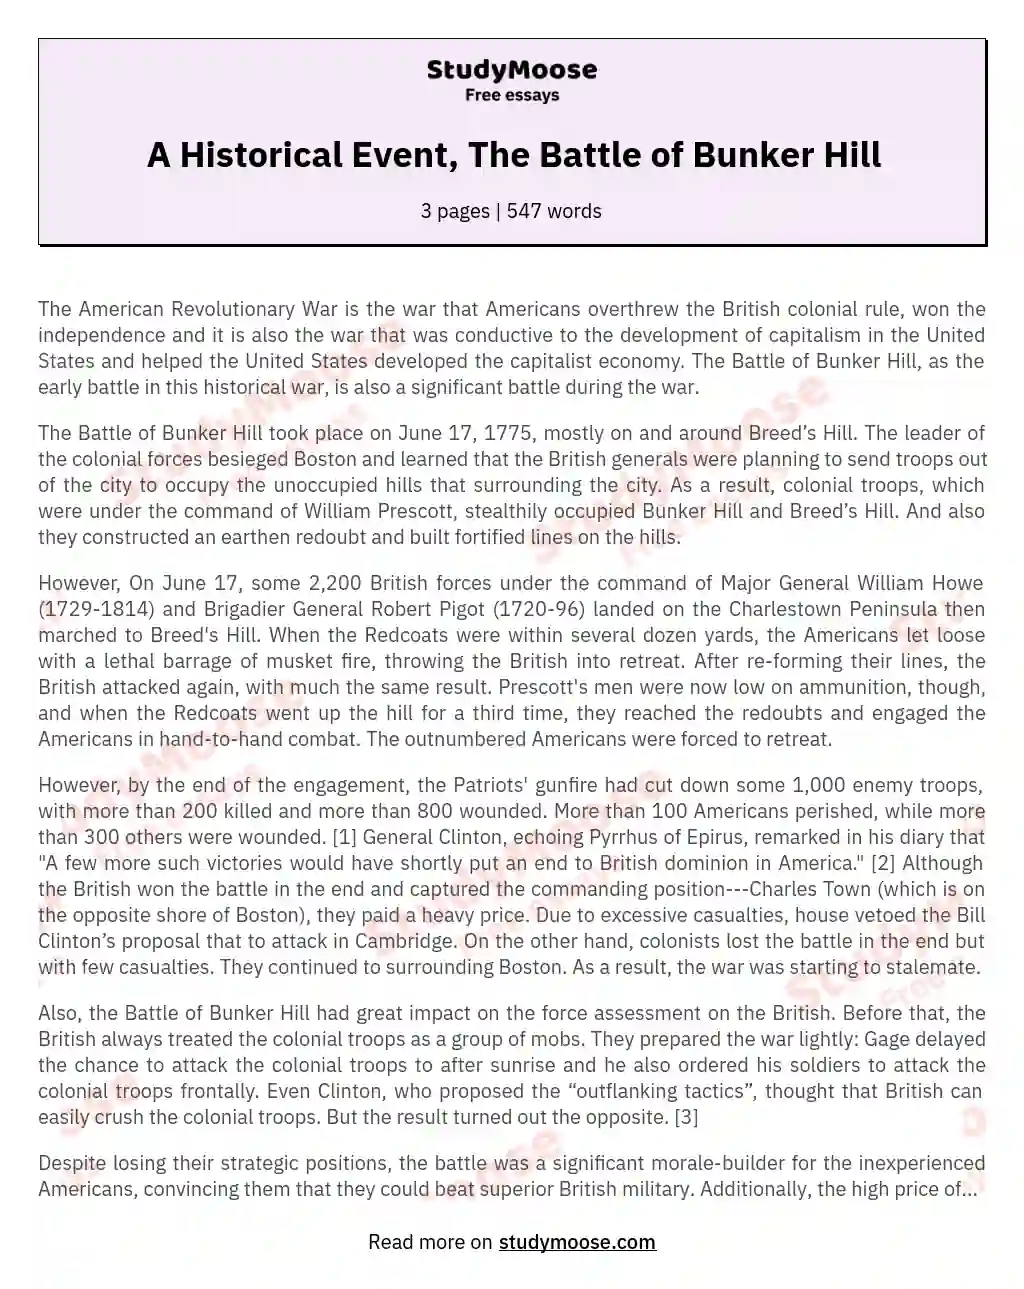 A Historical Event, The Battle of Bunker Hill